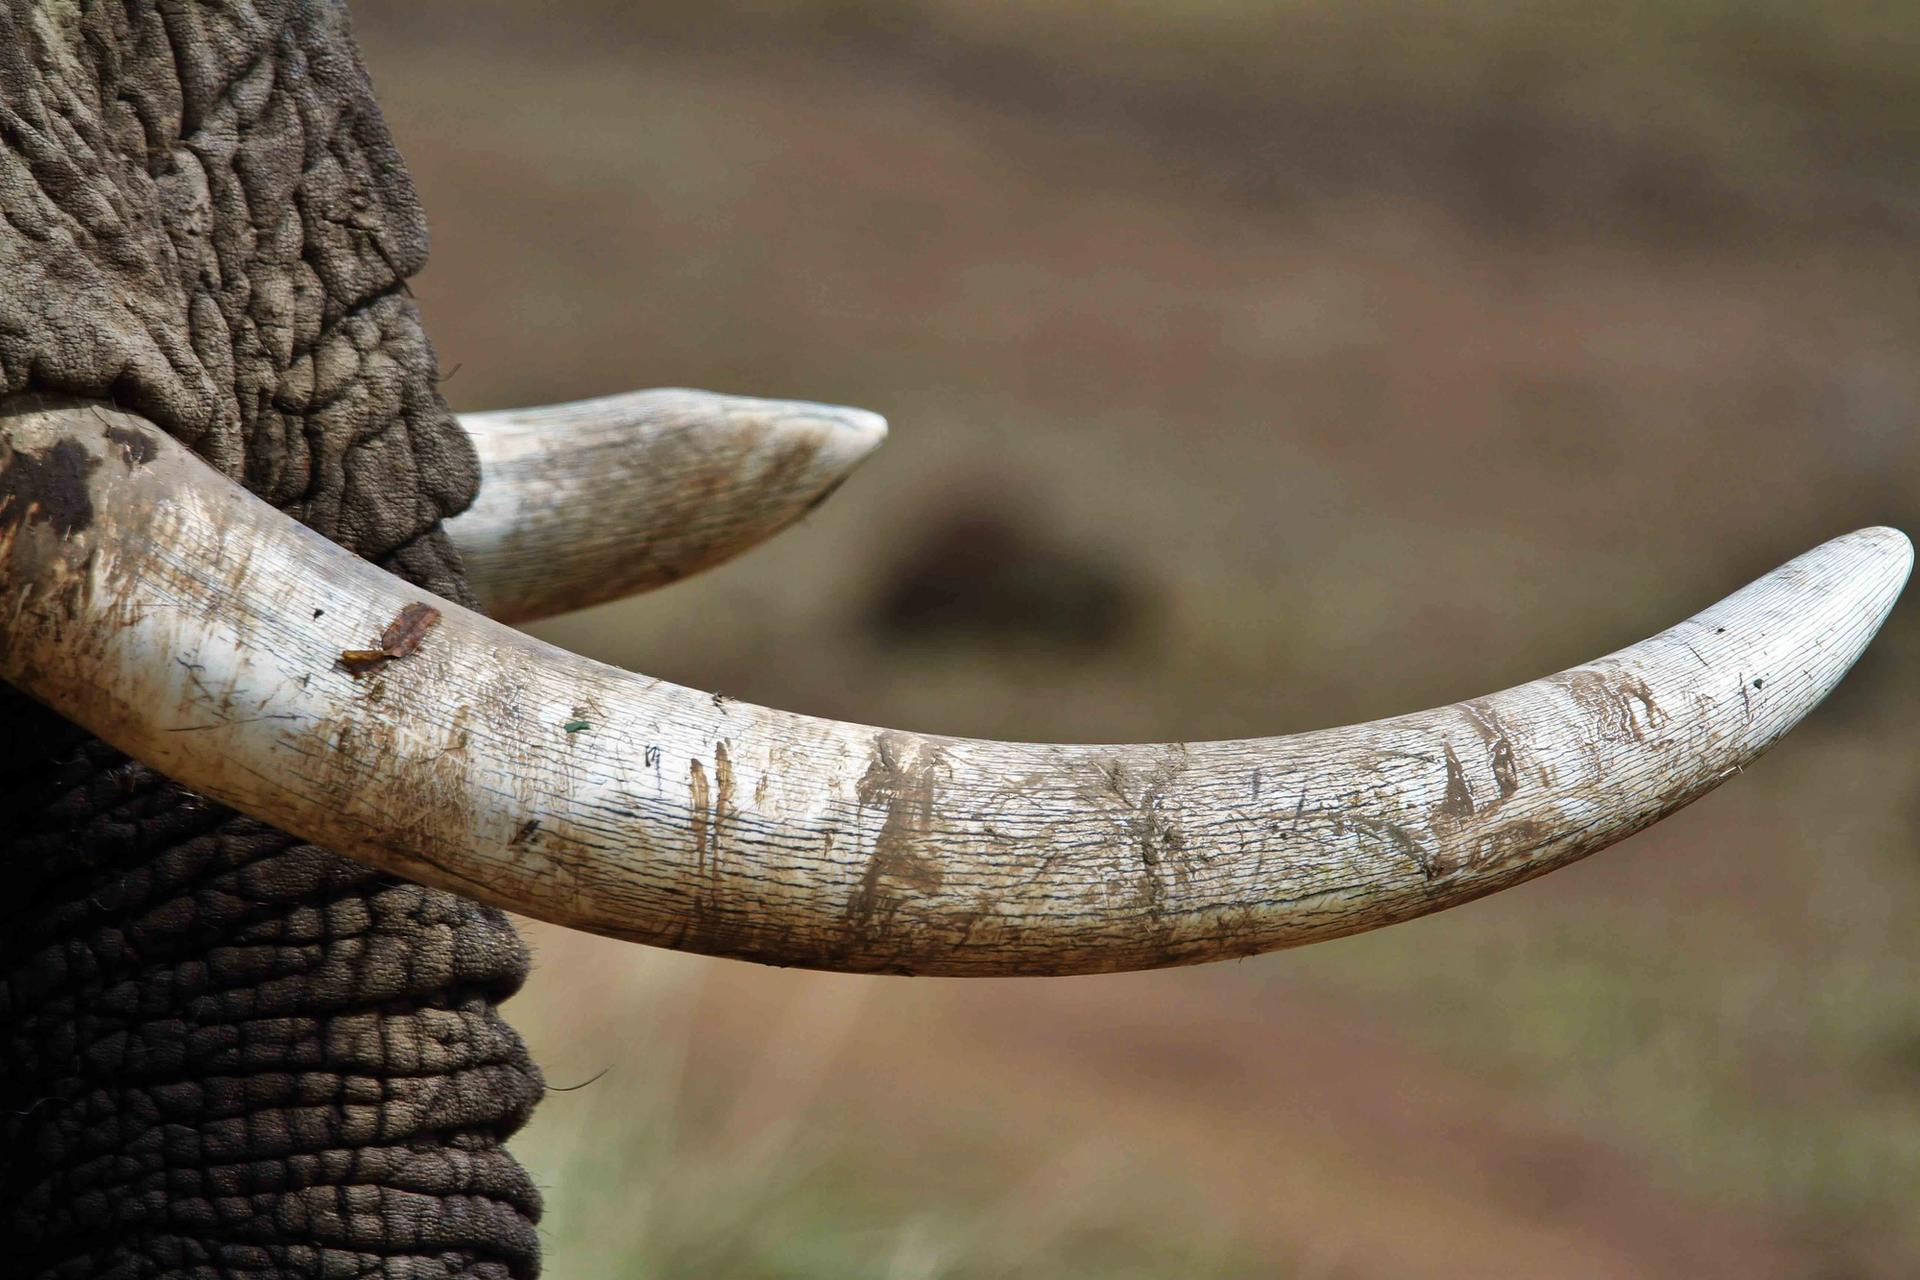 EU ivory laws will be getting tougher in line with UK laws Photo: Pawan Sharma